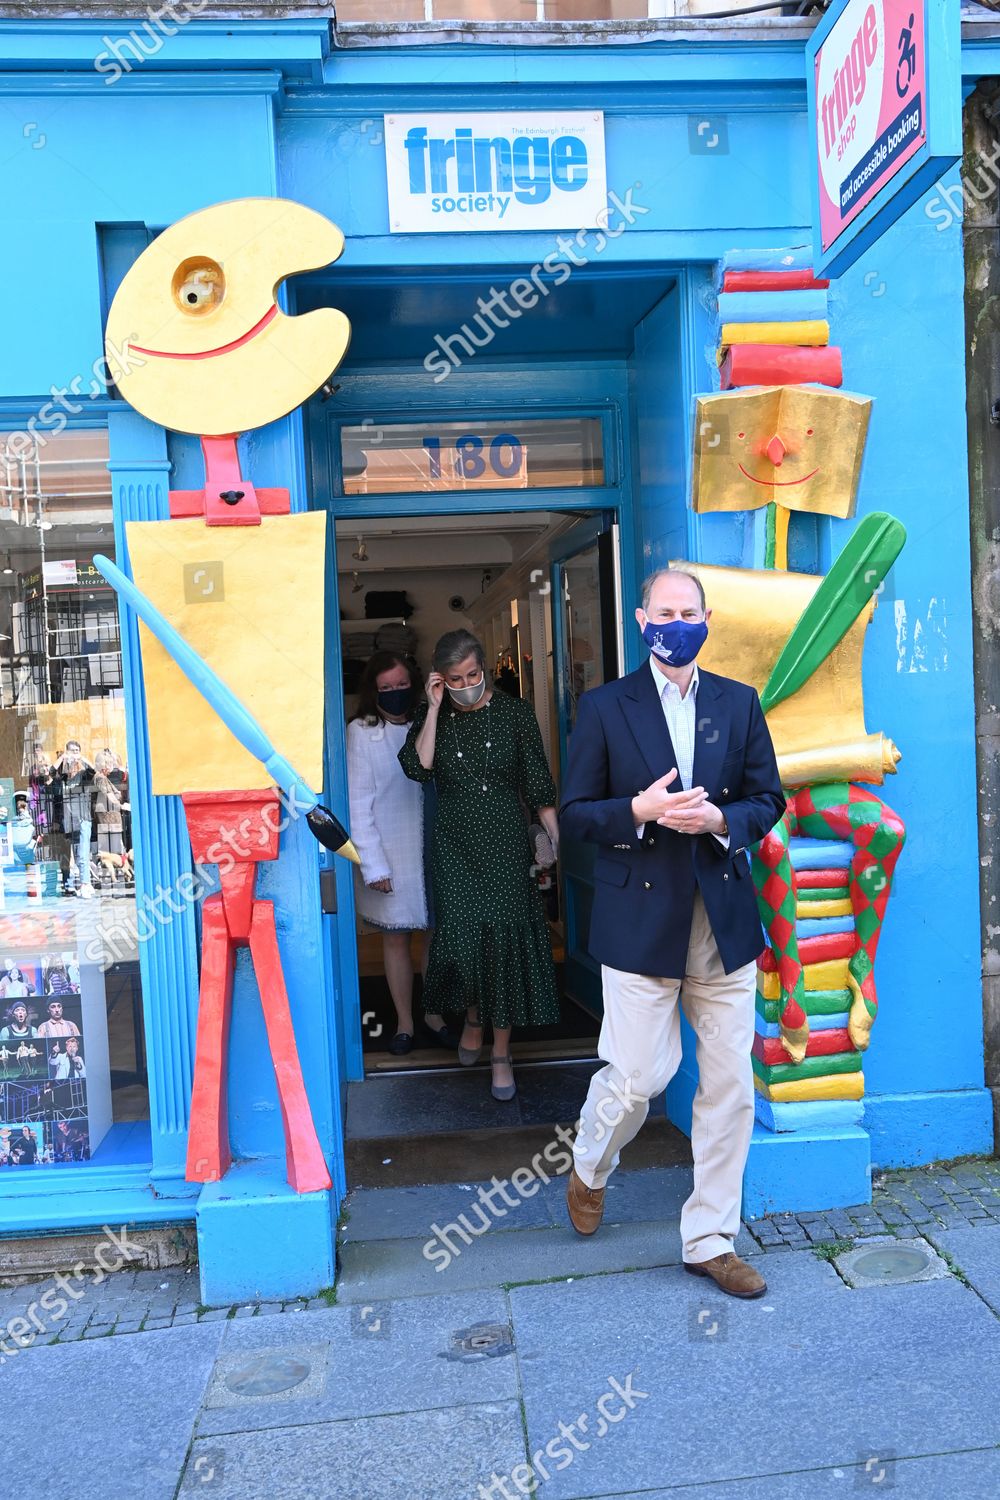 CASA REAL BRITÁNICA - Página 77 Prince-edward-and-sophie-countess-of-wessex-visit-to-edinburgh-scotland-uk-shutterstock-editorial-12173651cf